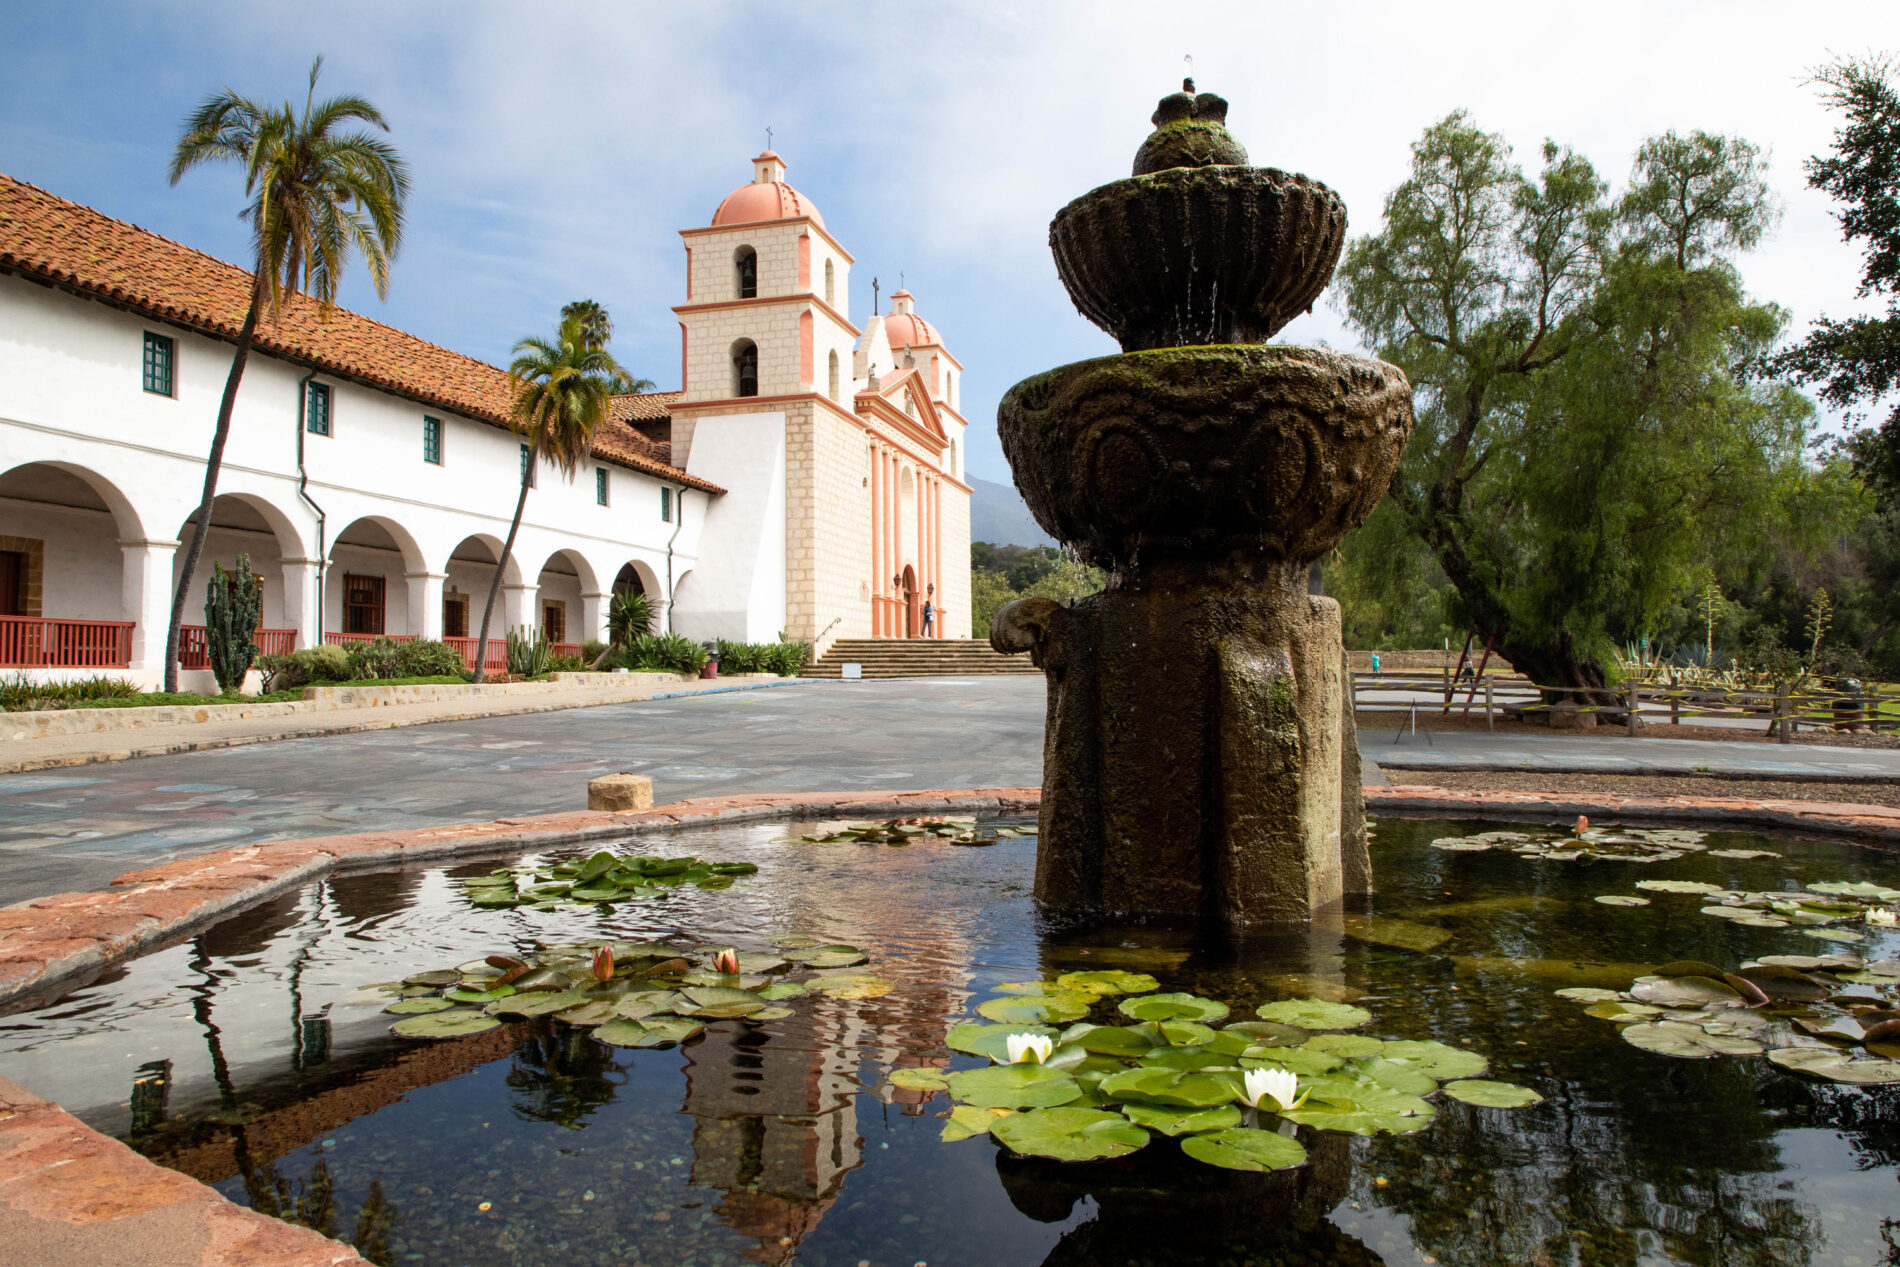 Santa Barbara mission is an easy stop along the PCH.